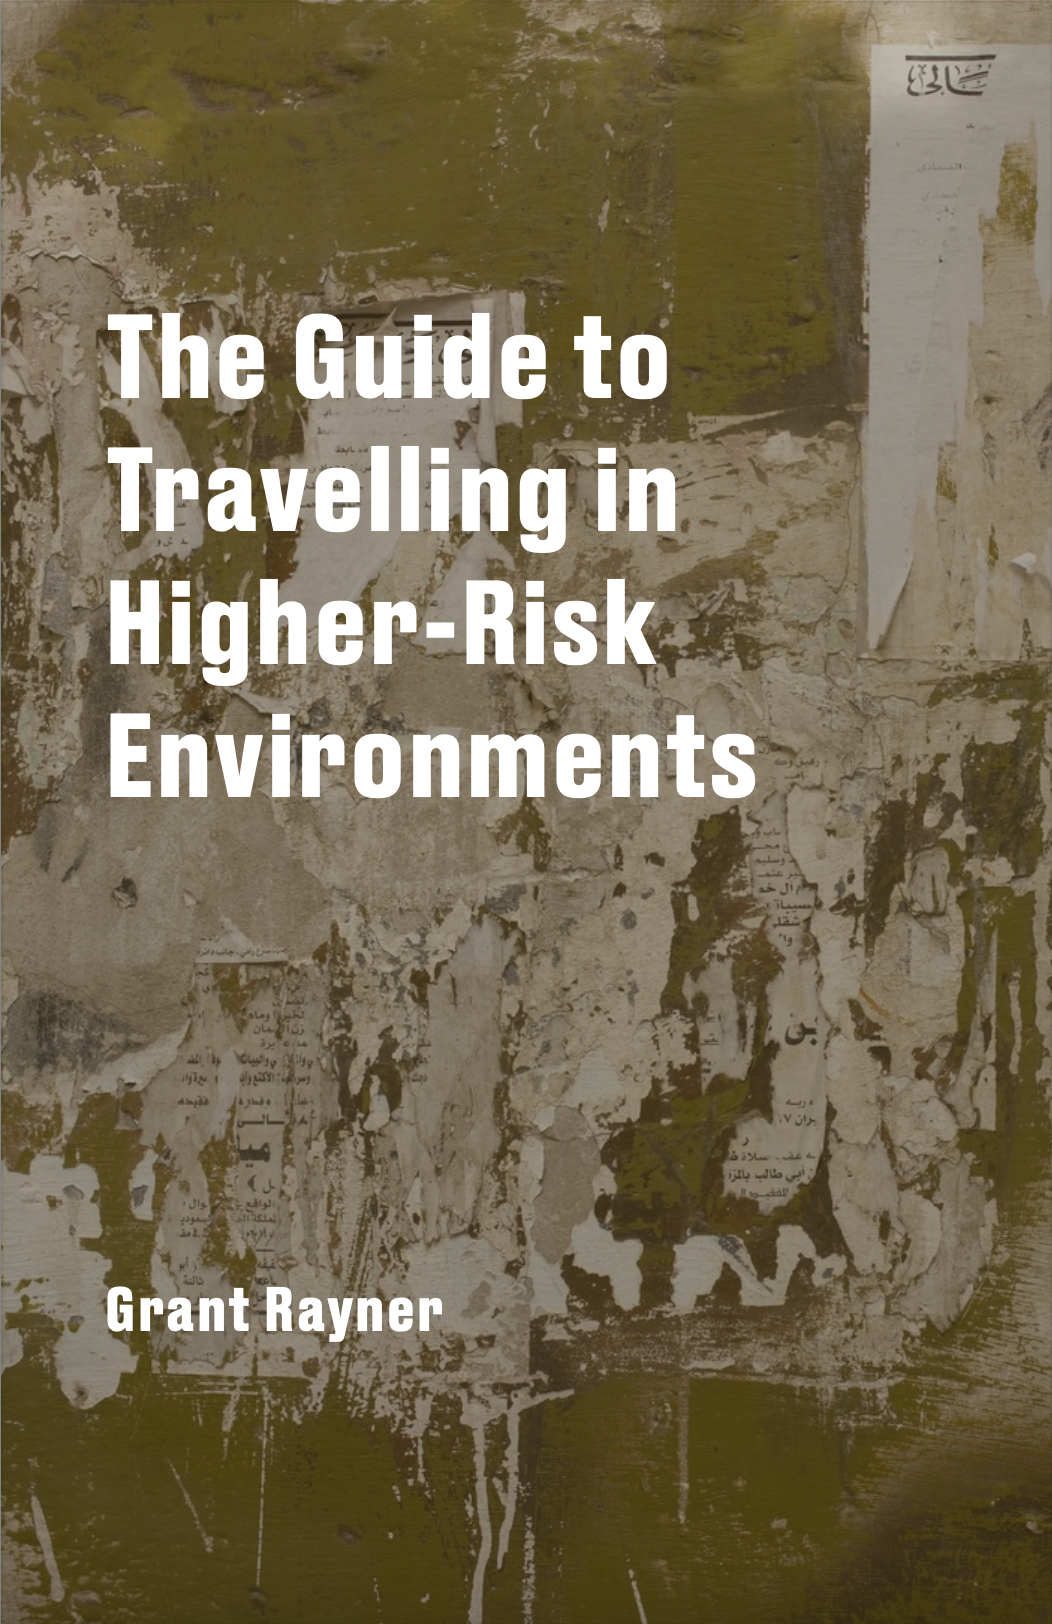 The Guide to Travelling in Higher-Risk Environments